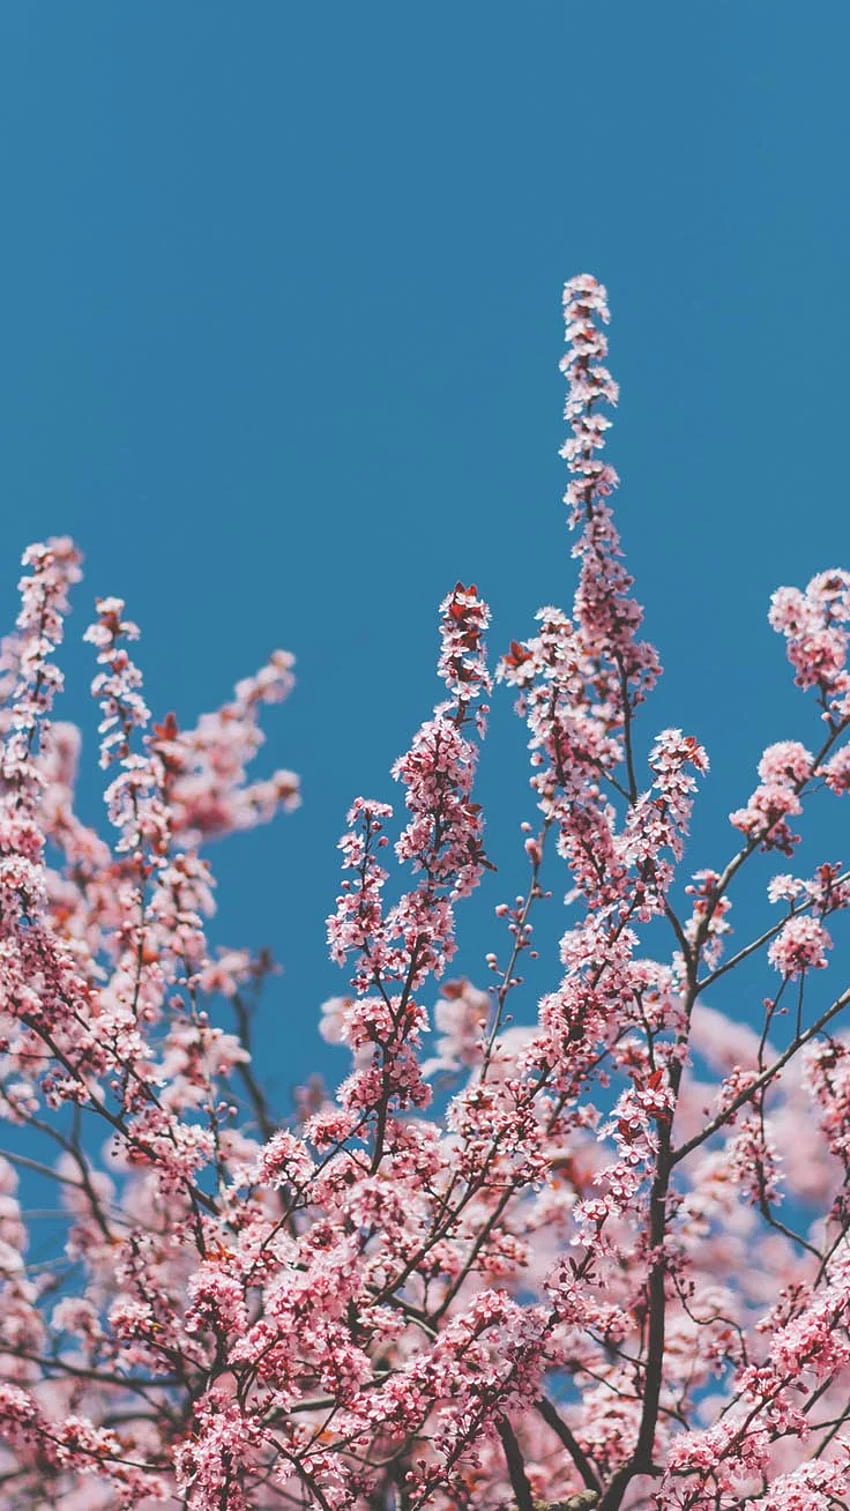 1920x1080px, 1080P Free download | Spring Blossom iPhone By Preppy ...